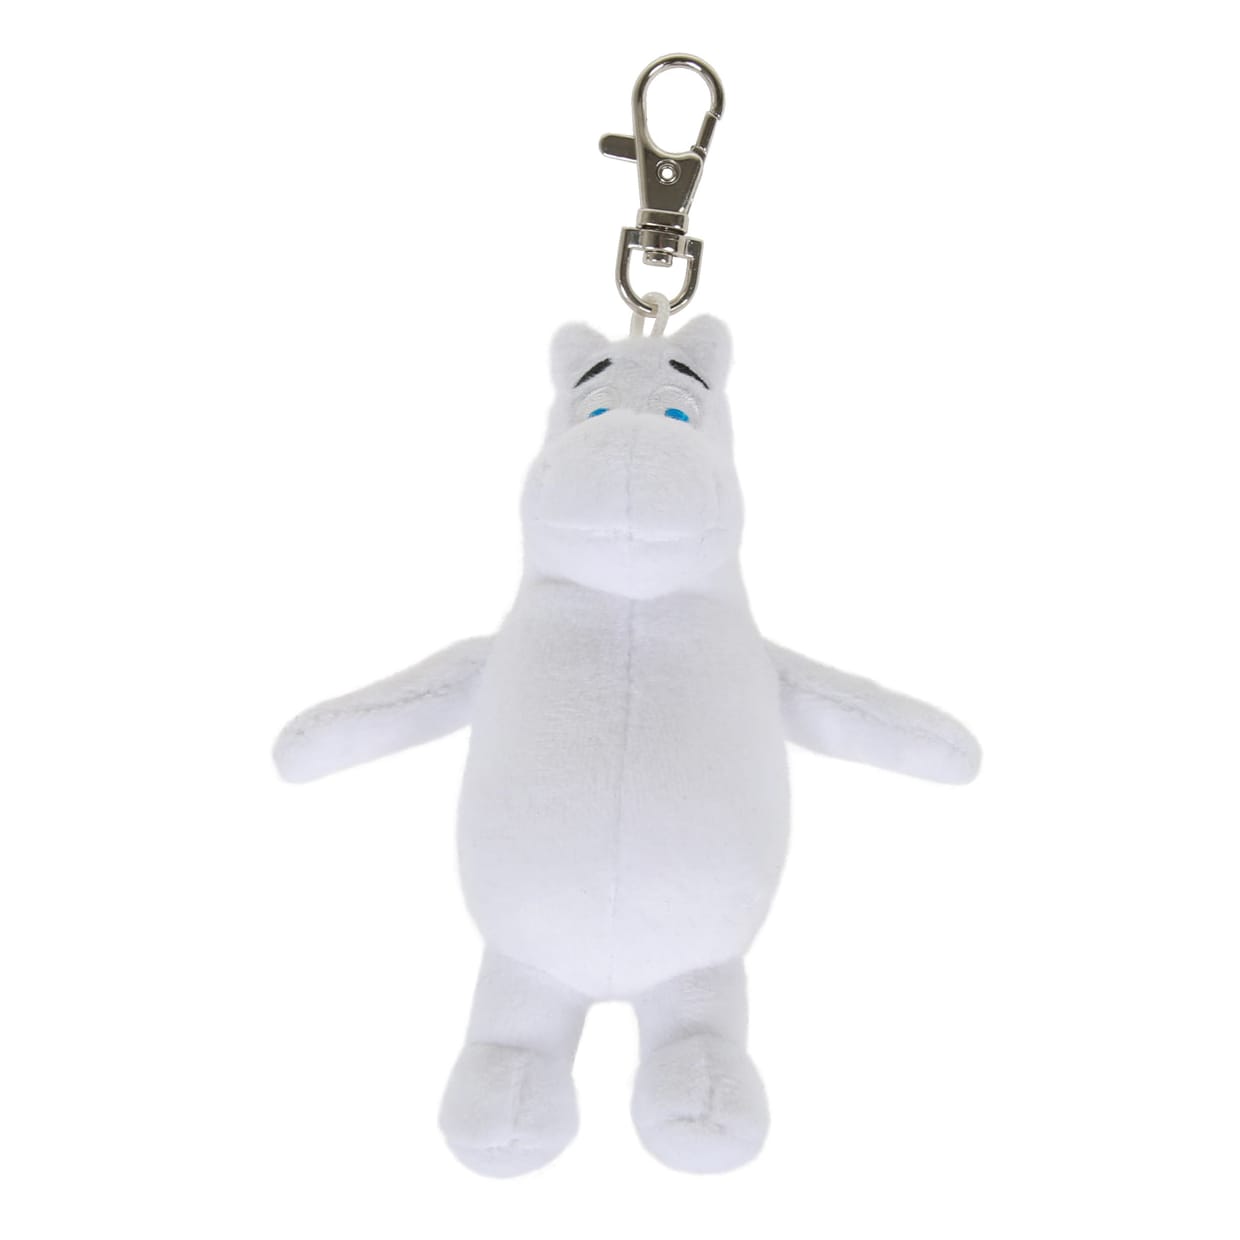 NEW The Moomins Plush Bag Clip Soft Toy Moomin Keyring Keychain Pappa 3" 